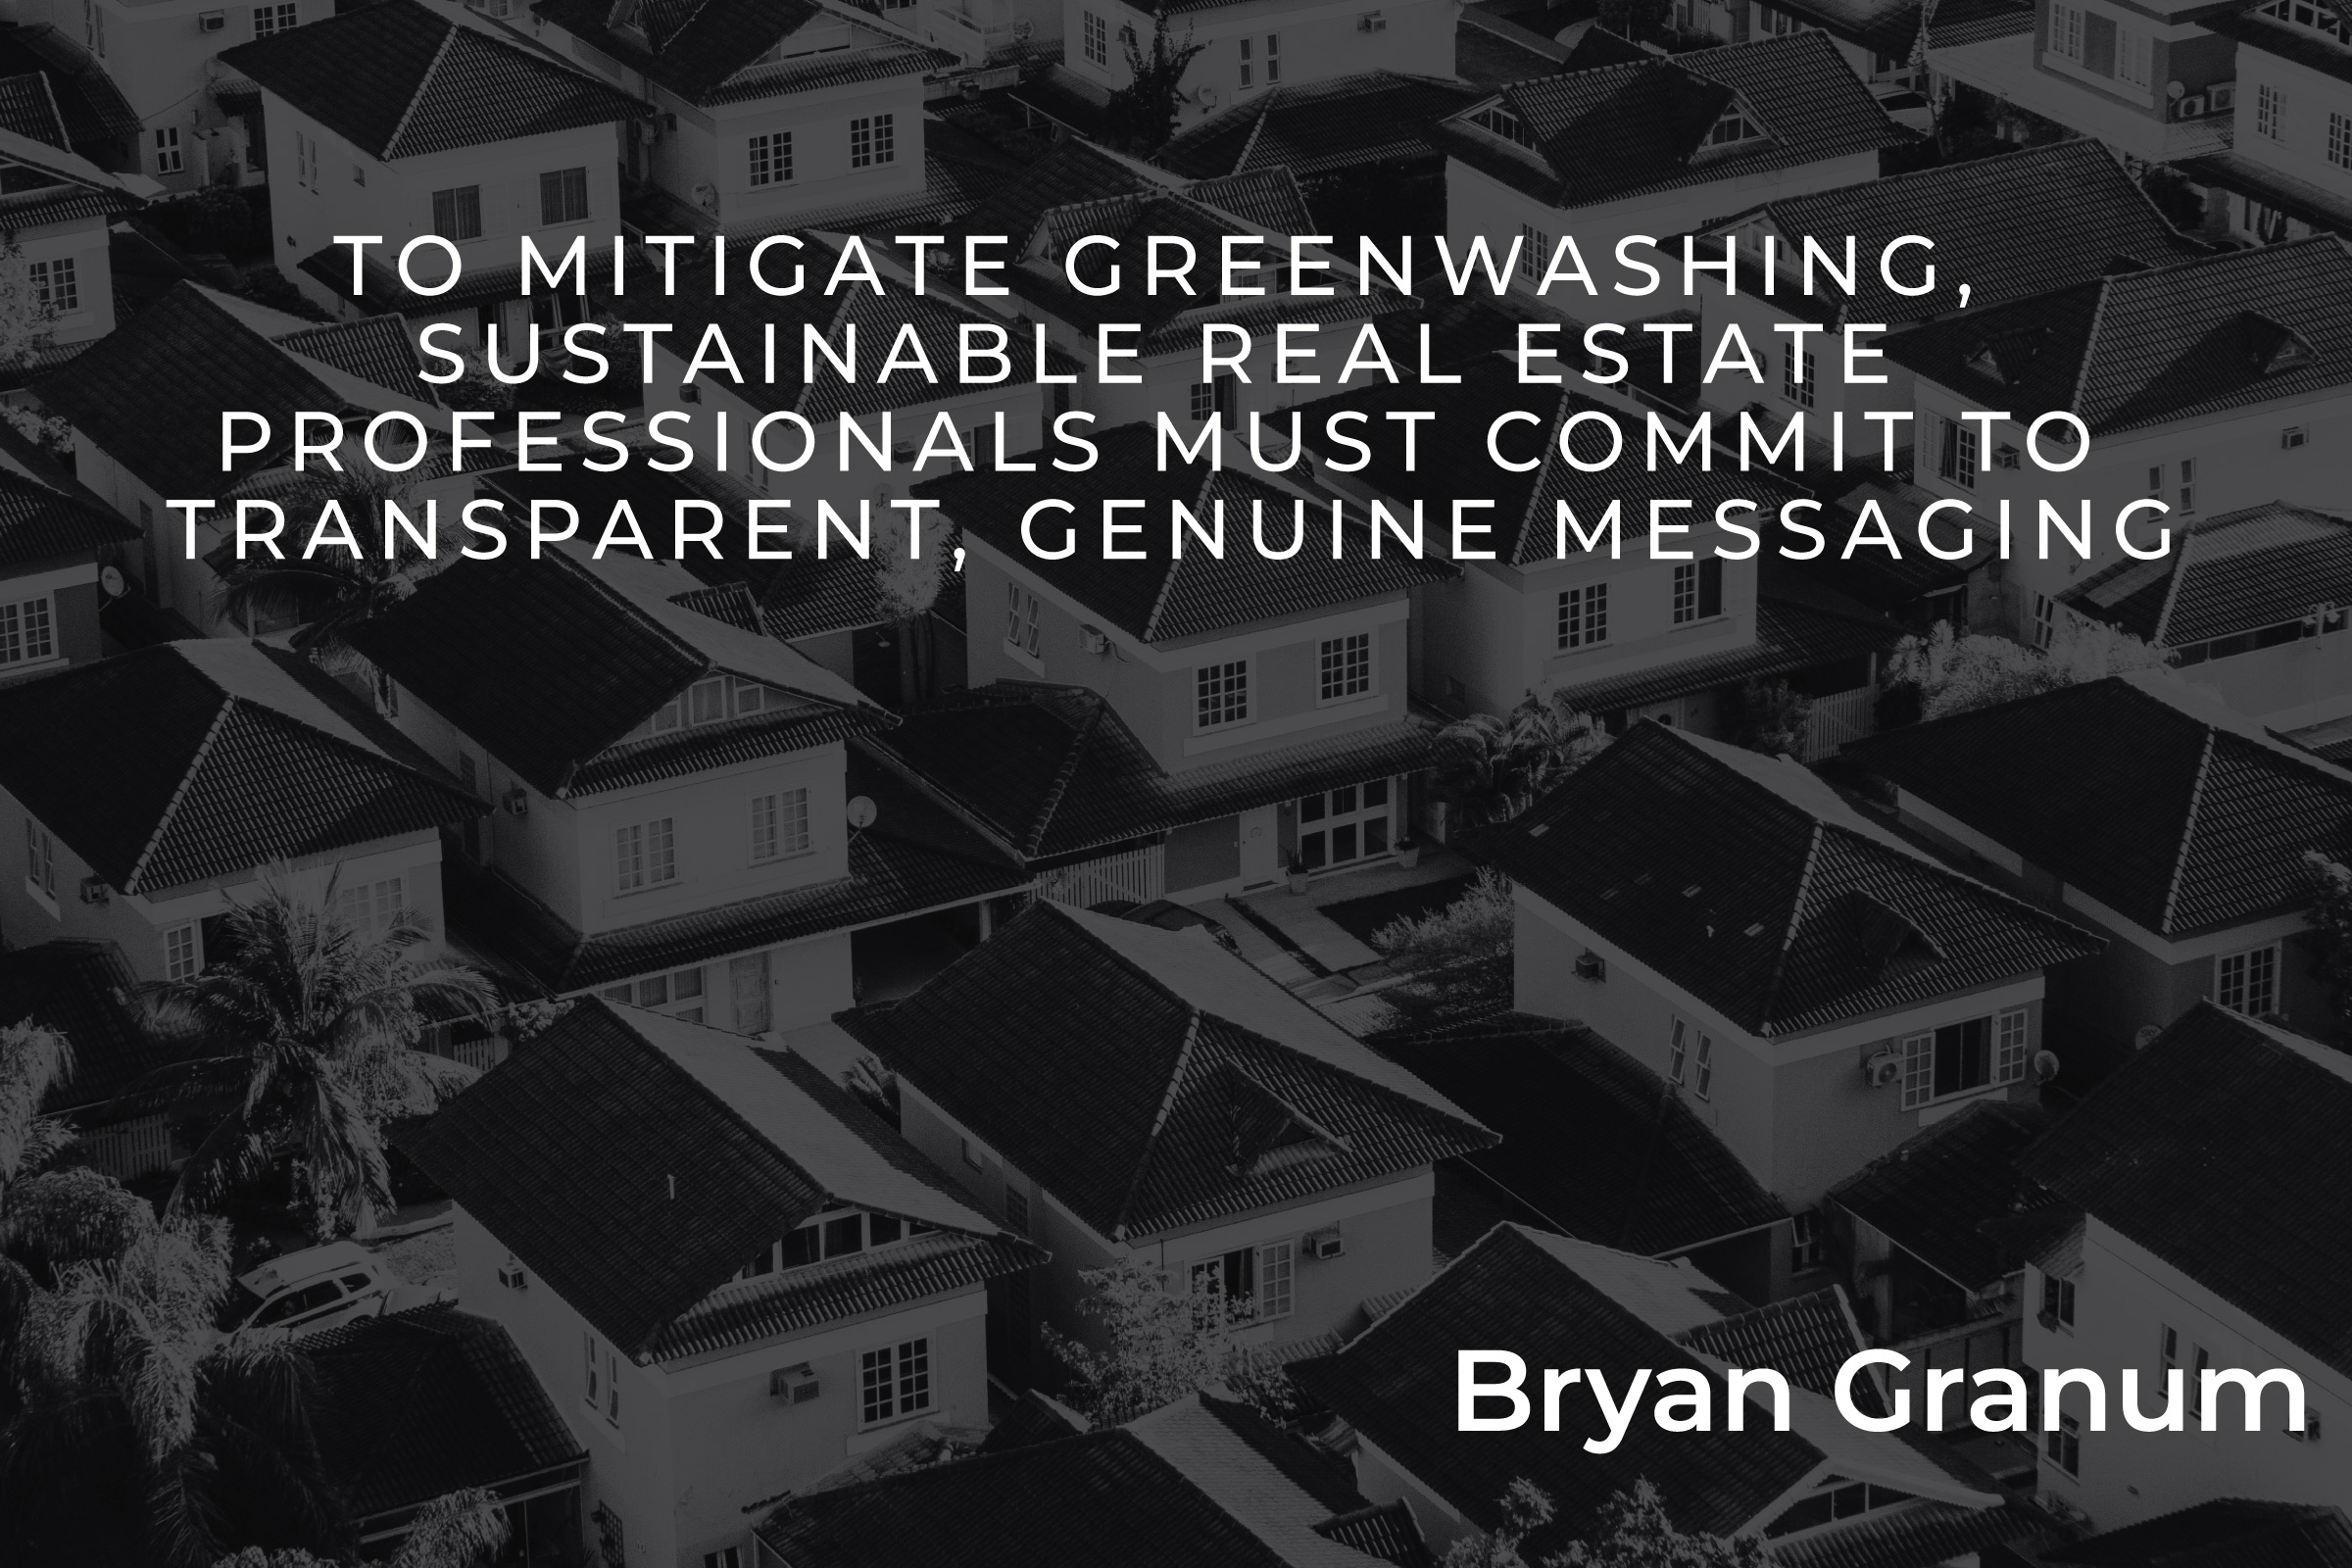 To Mitigate Greenwashing, Sustainable Real Estate Professionals Must Commit to Transparent, Genuine Messaging